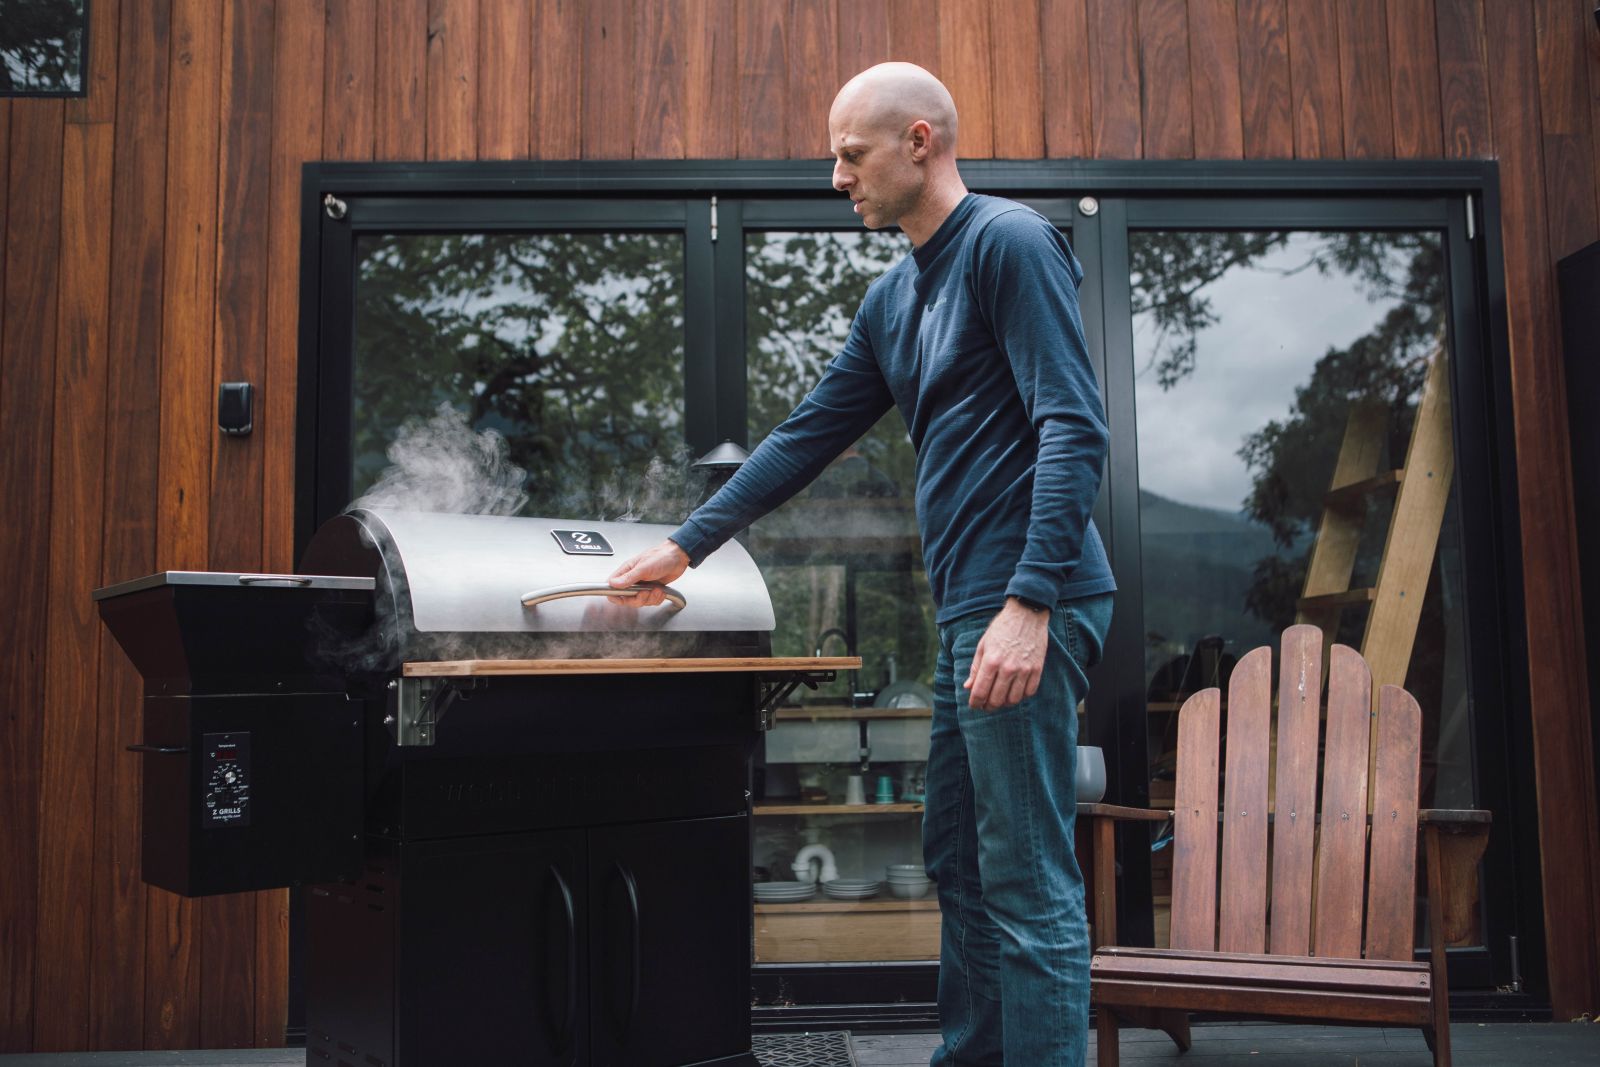 A man next to a barbecue with smoke coming out.